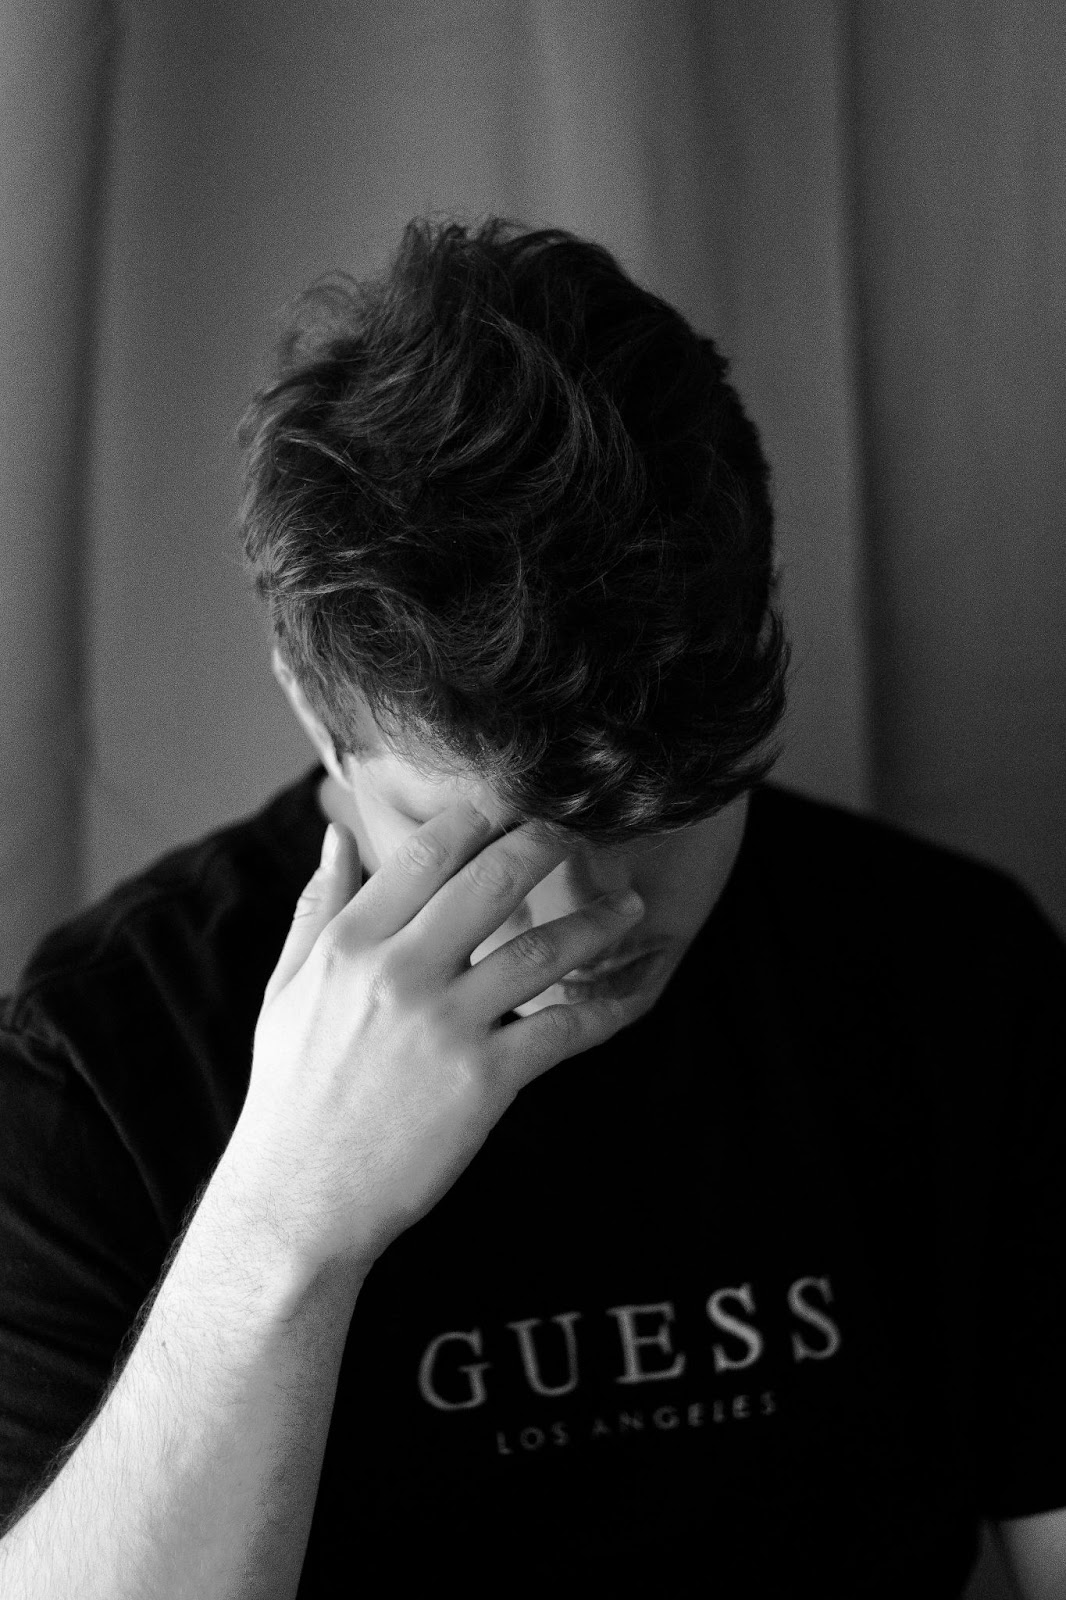 A picture of man, head bowed, looking downtrodden with the word Guess on his T-shirt.